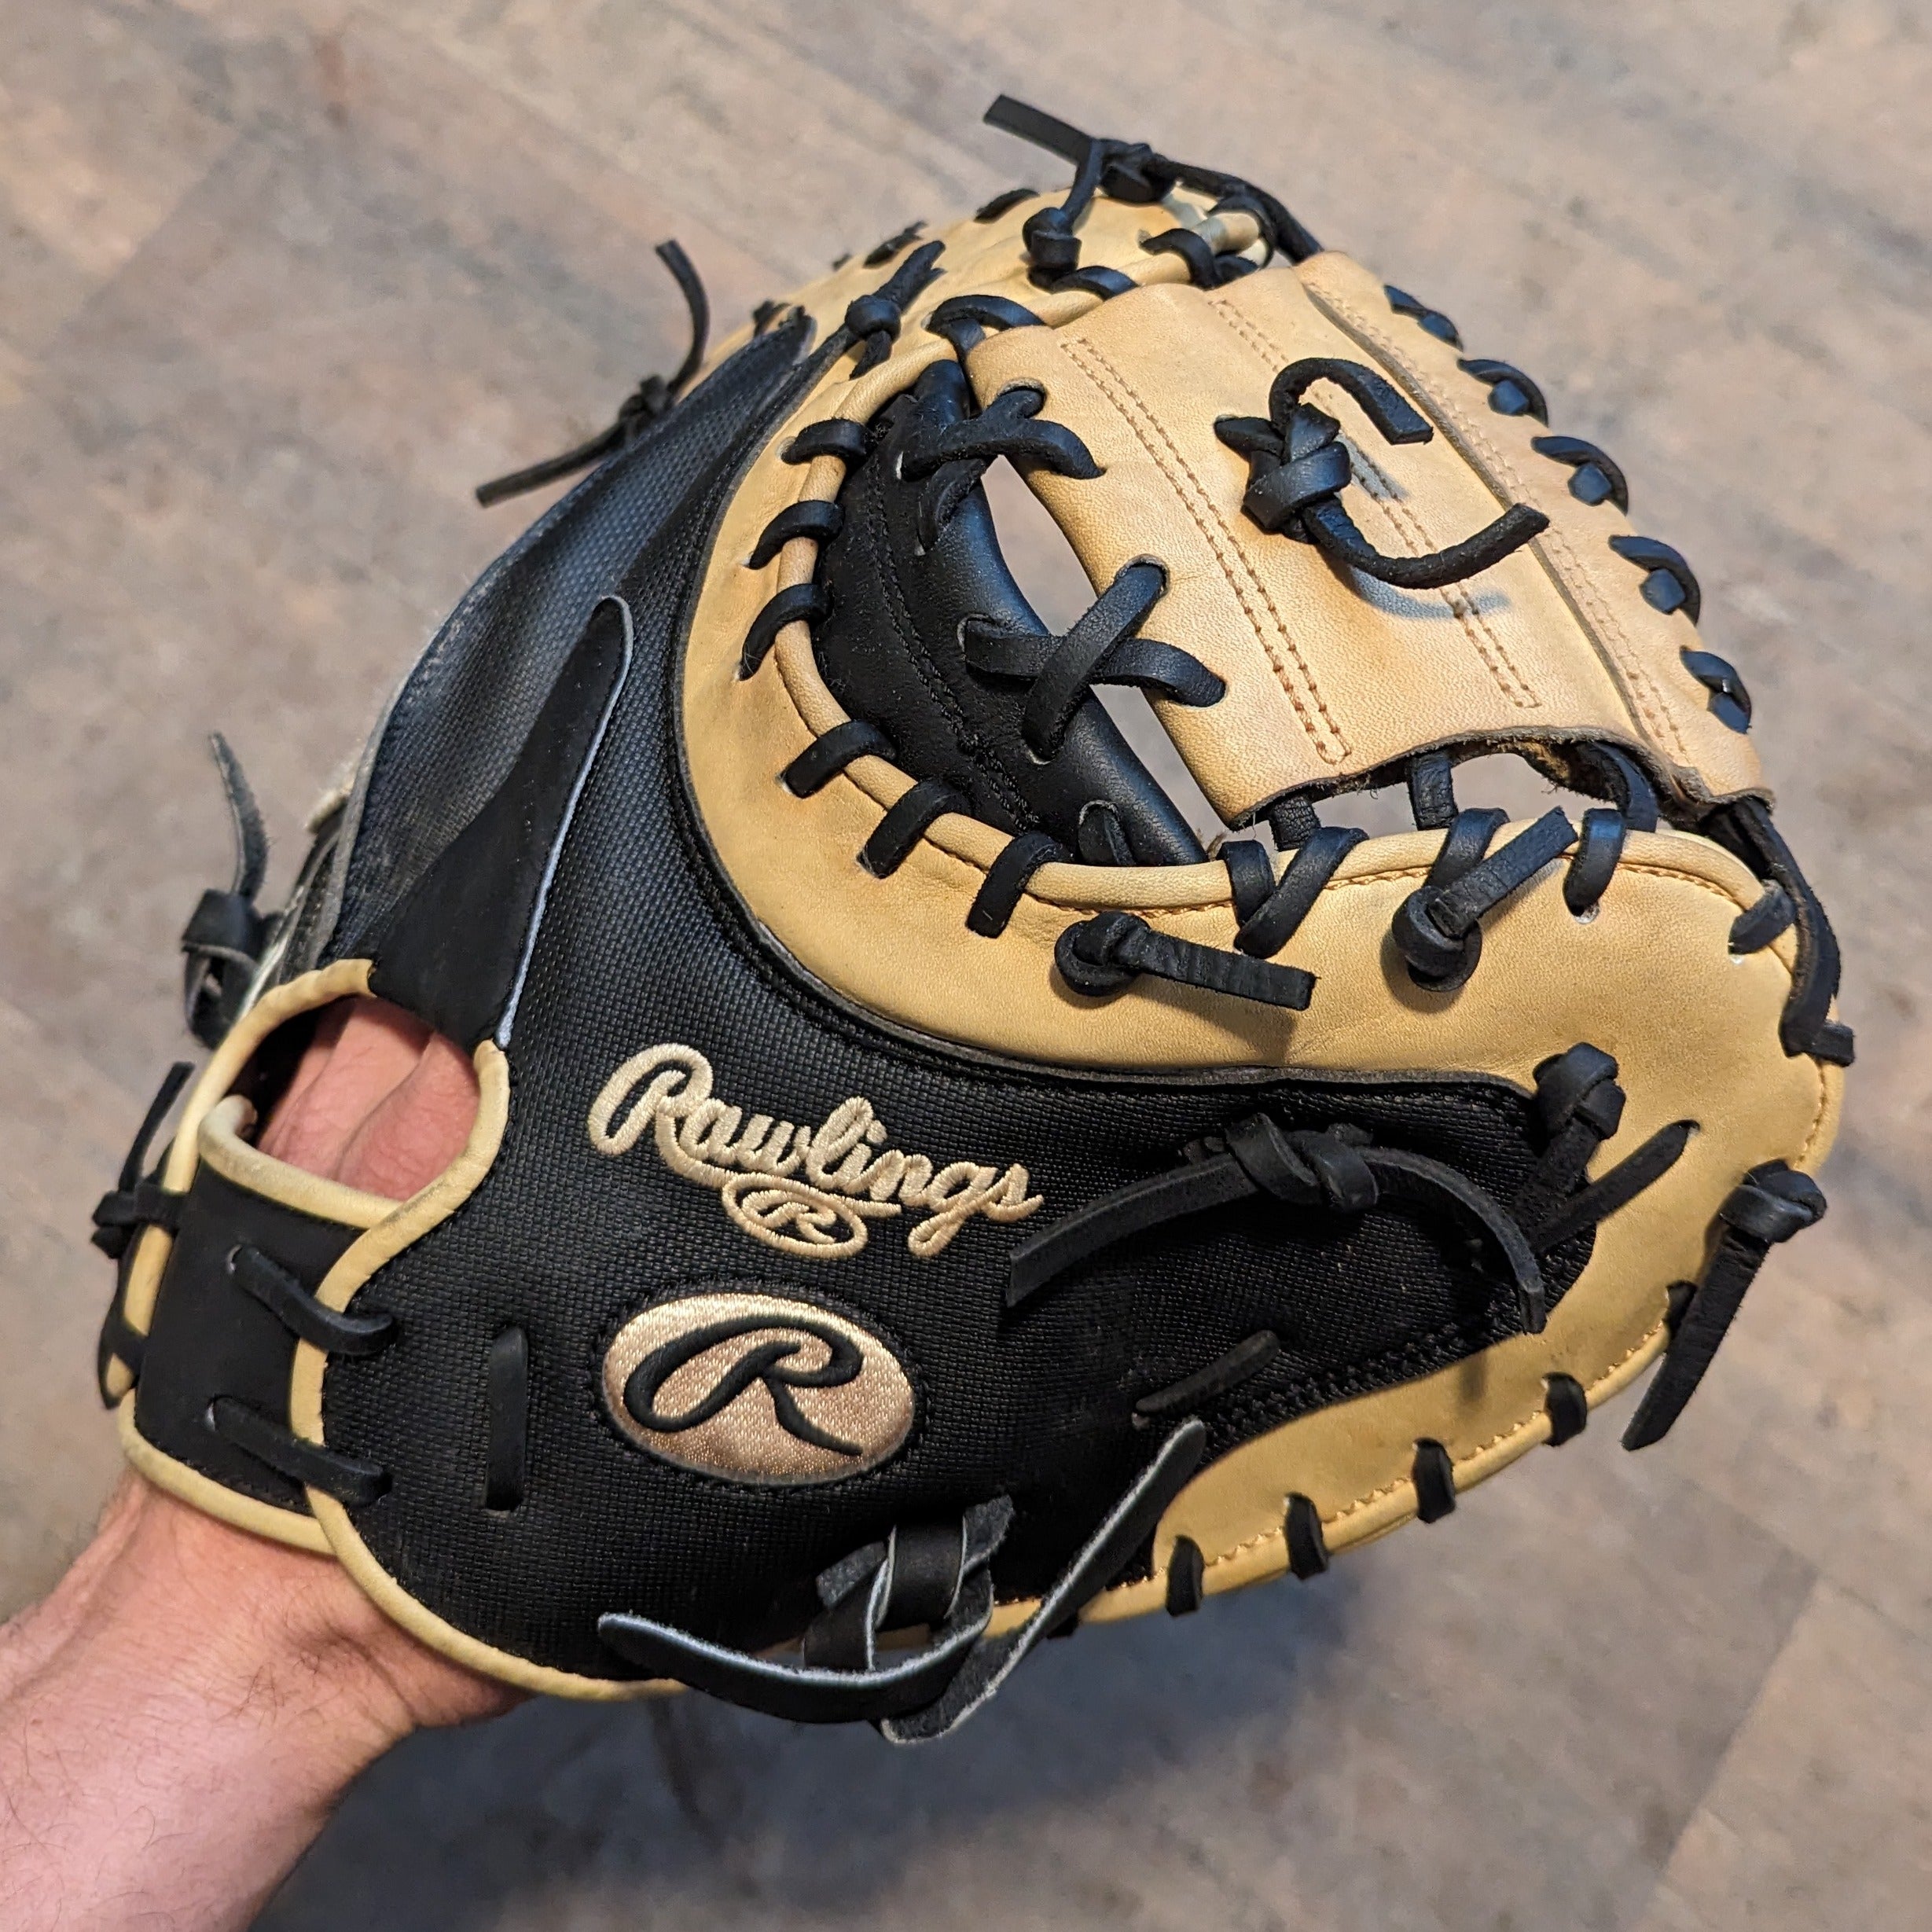 RAWLINGS HEART OF THE HIDE - PROYM4BC - 34.00” BASEBALL CATCHER'S